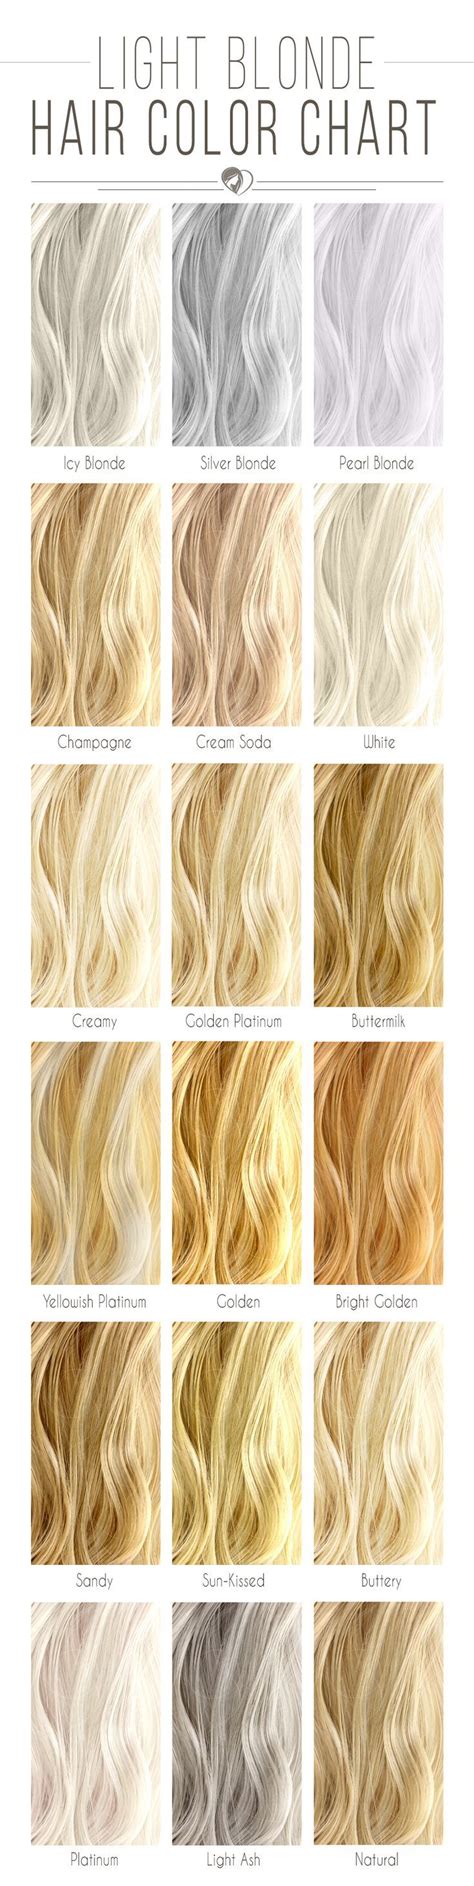 Girls with blonde hair are associated with lightness of being, good carelessness and tender femininity. Blonde Hair Color Chart To Find The Right Shade For You ...